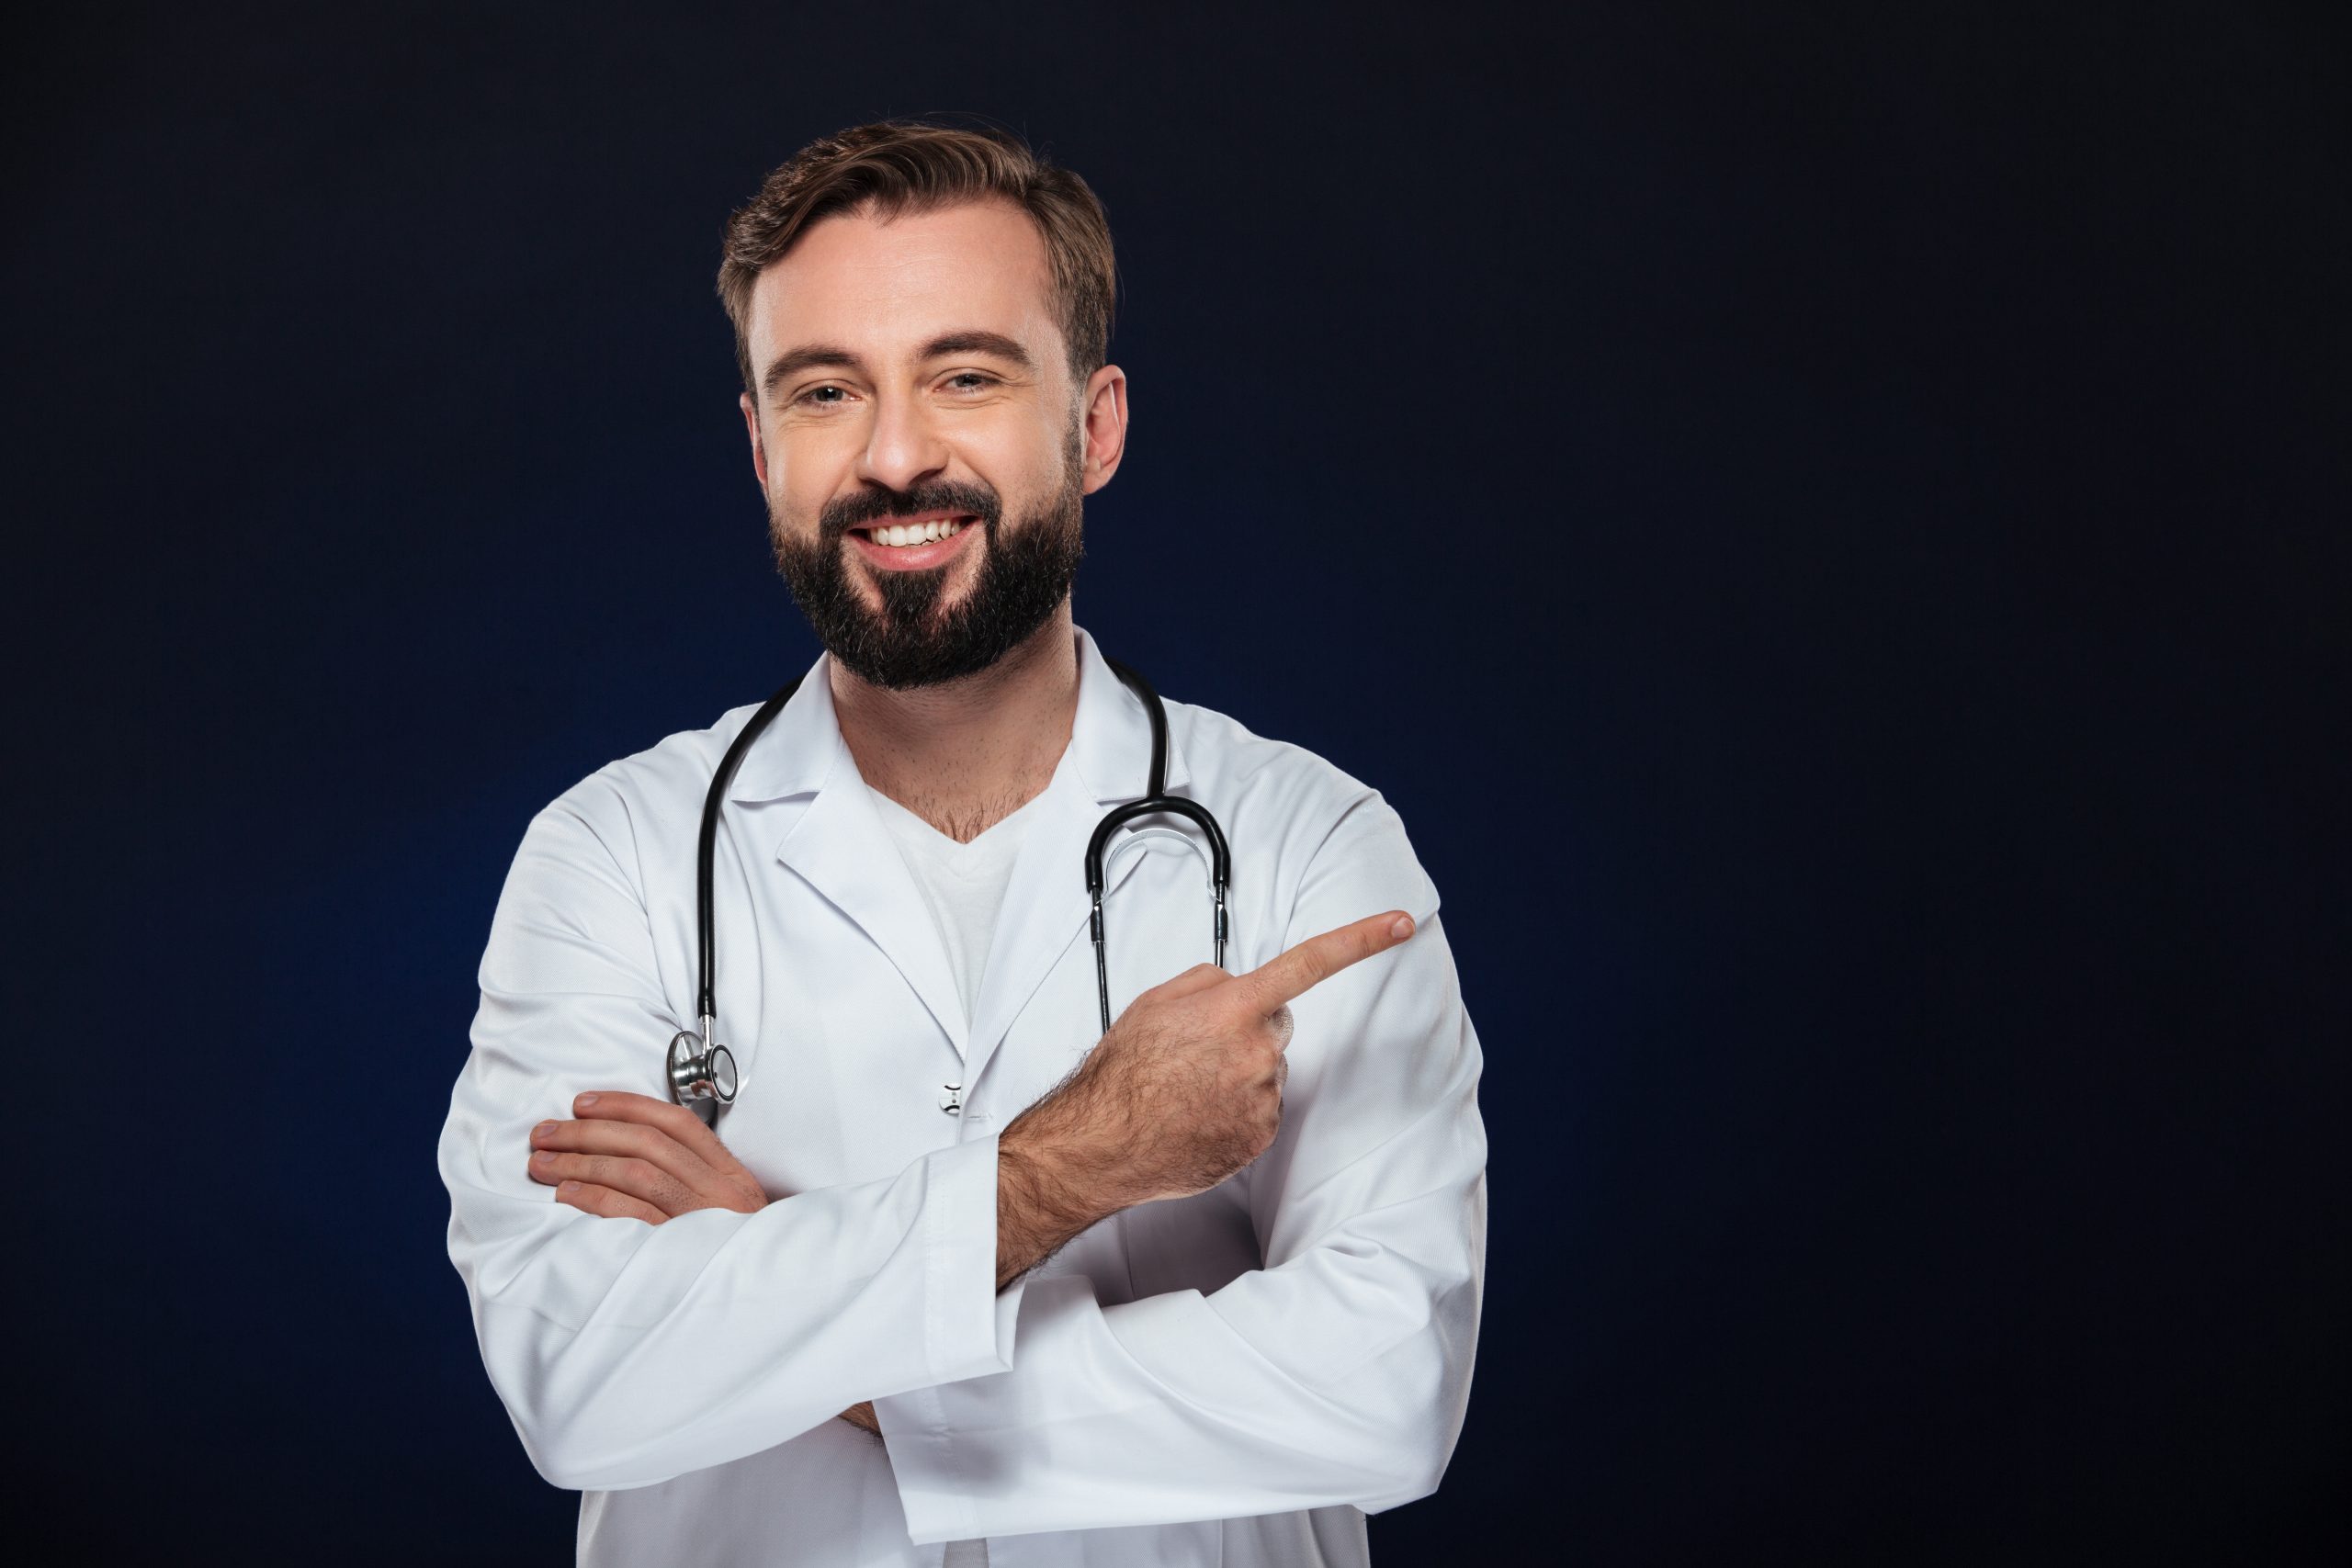 5 Qualities To Look For When Hiring A Medical Expert Witness For Your Trial